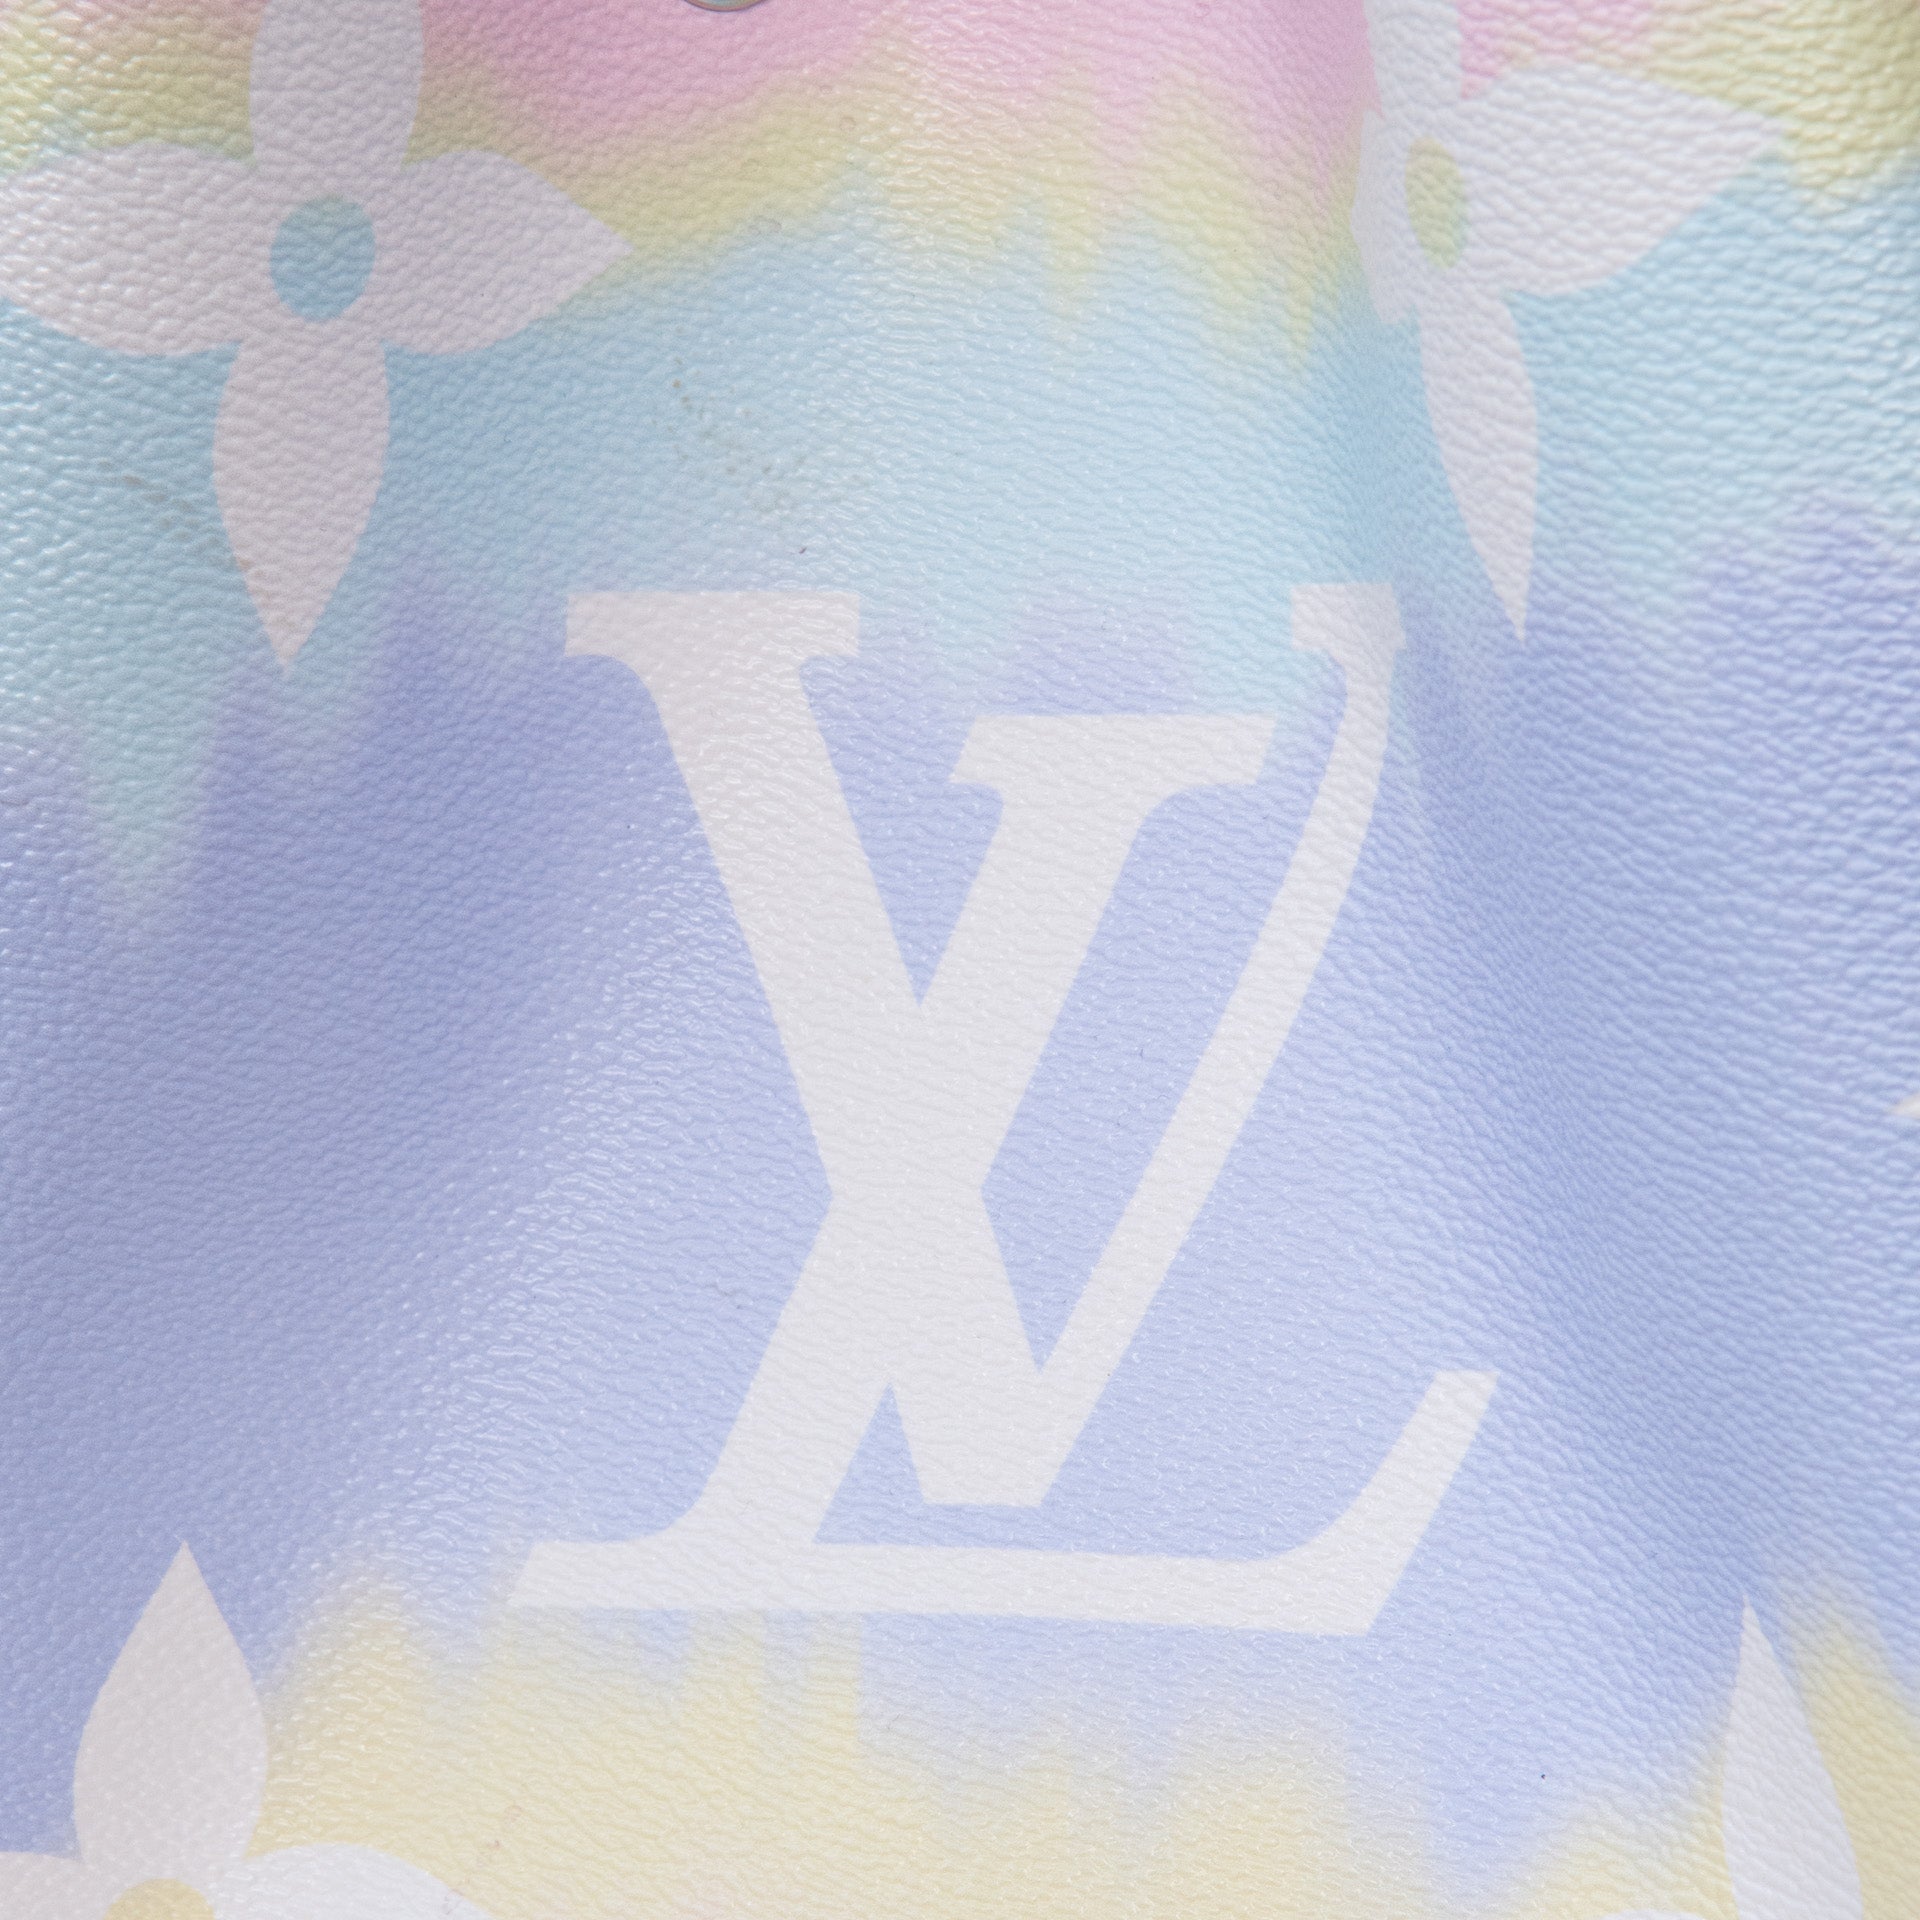 Louis Vuitton Limited Edition Neo Noe Pastel Bag - Image 11 of 12